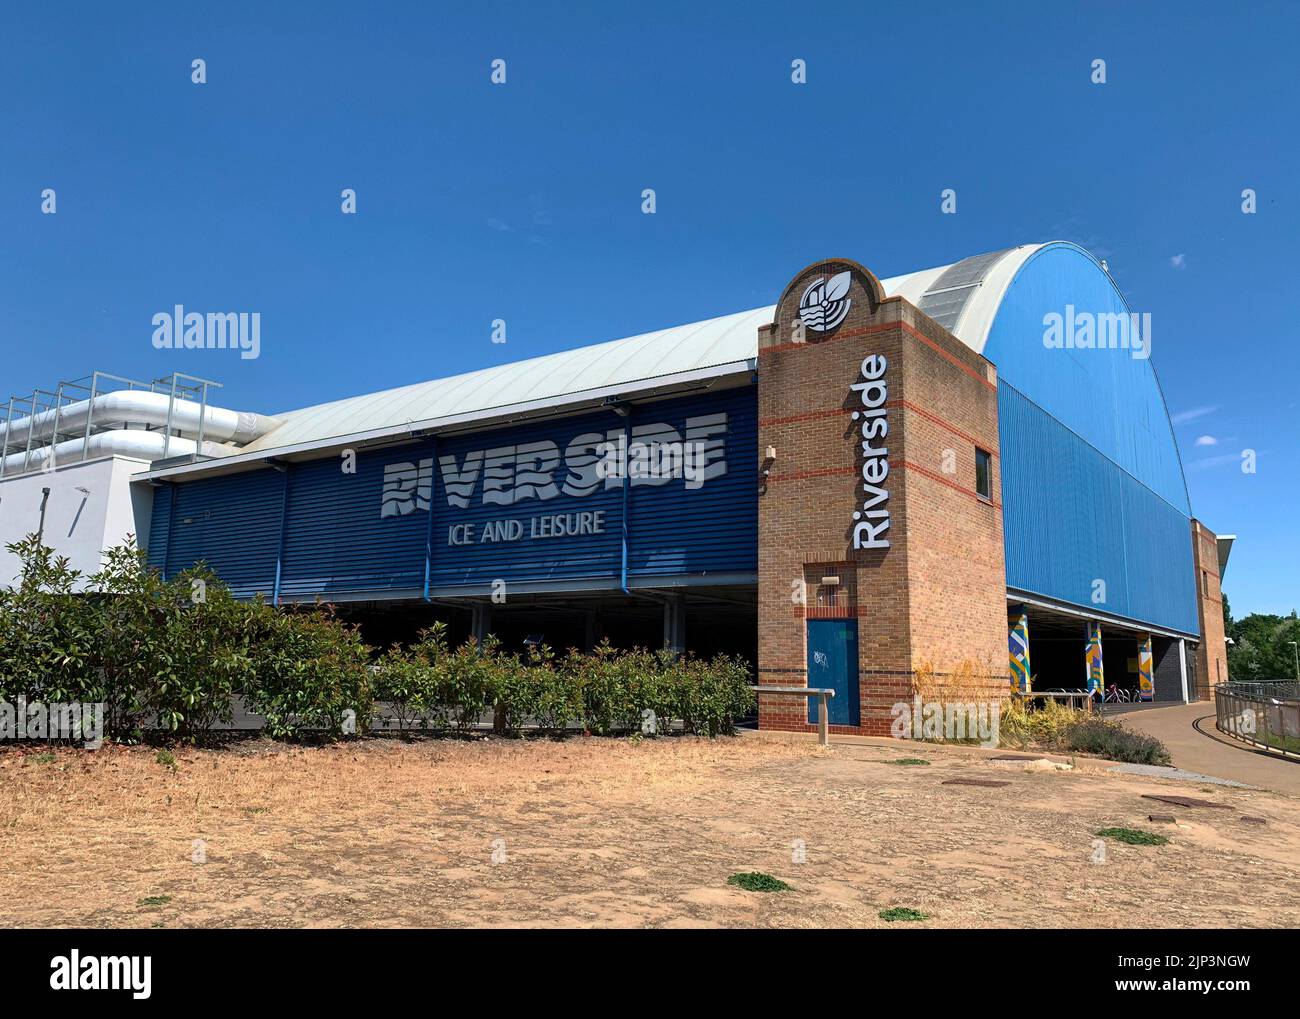 The ice rink and leisure centre building at Riverside, Chelmsford, Essex, UK. Stock Photo